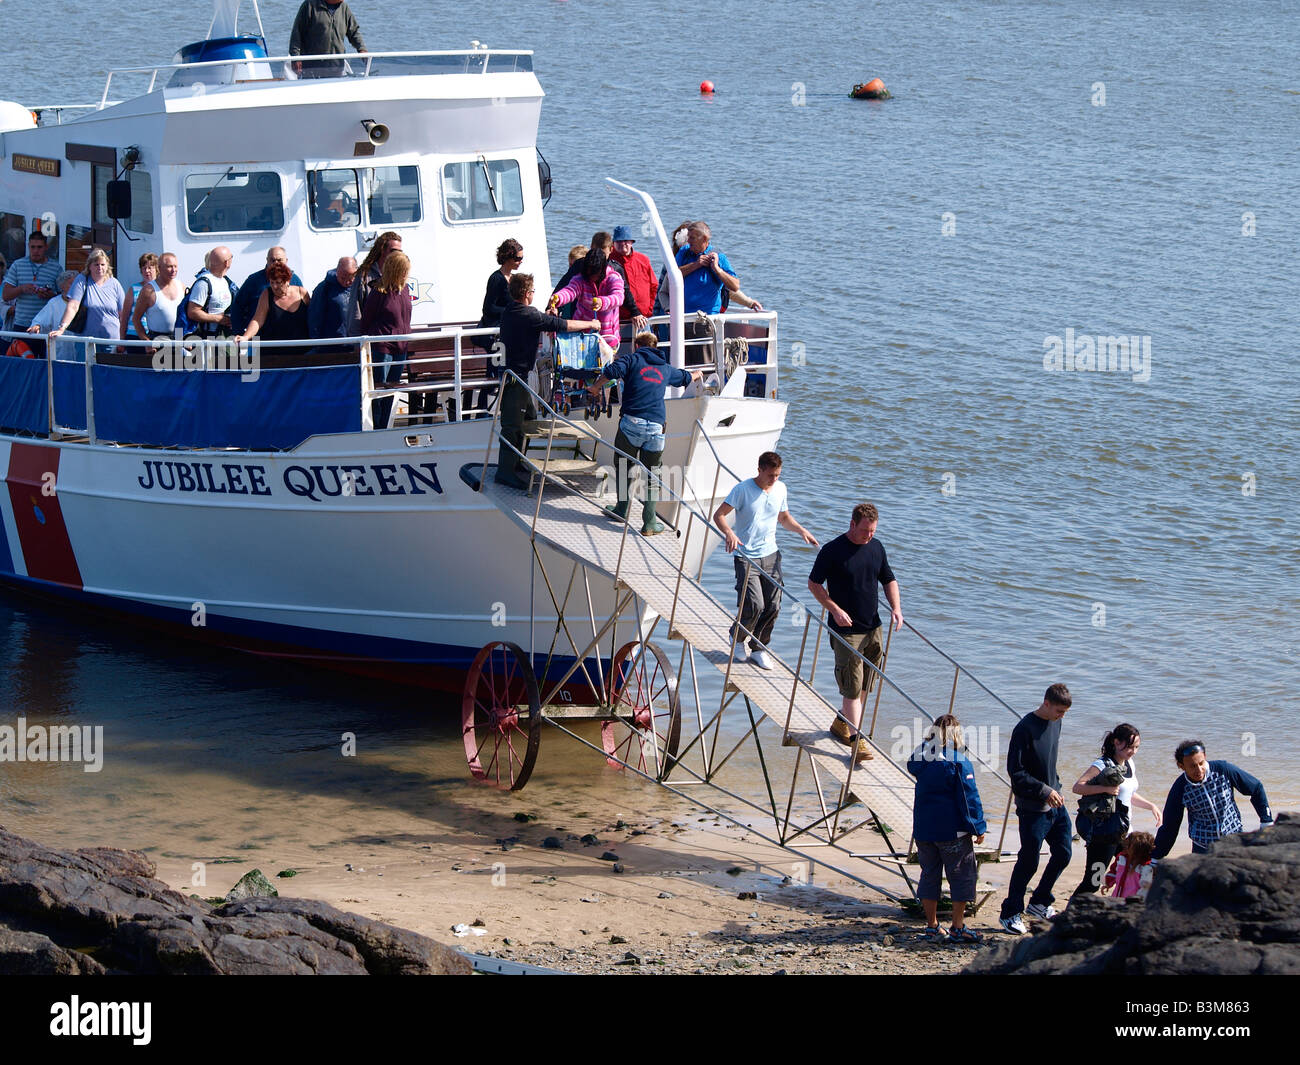 Passengers disembarking the Jubilee Queen tour ship, by way of a wheeled ramp which is pushed into the water to meet the ship. Stock Photo